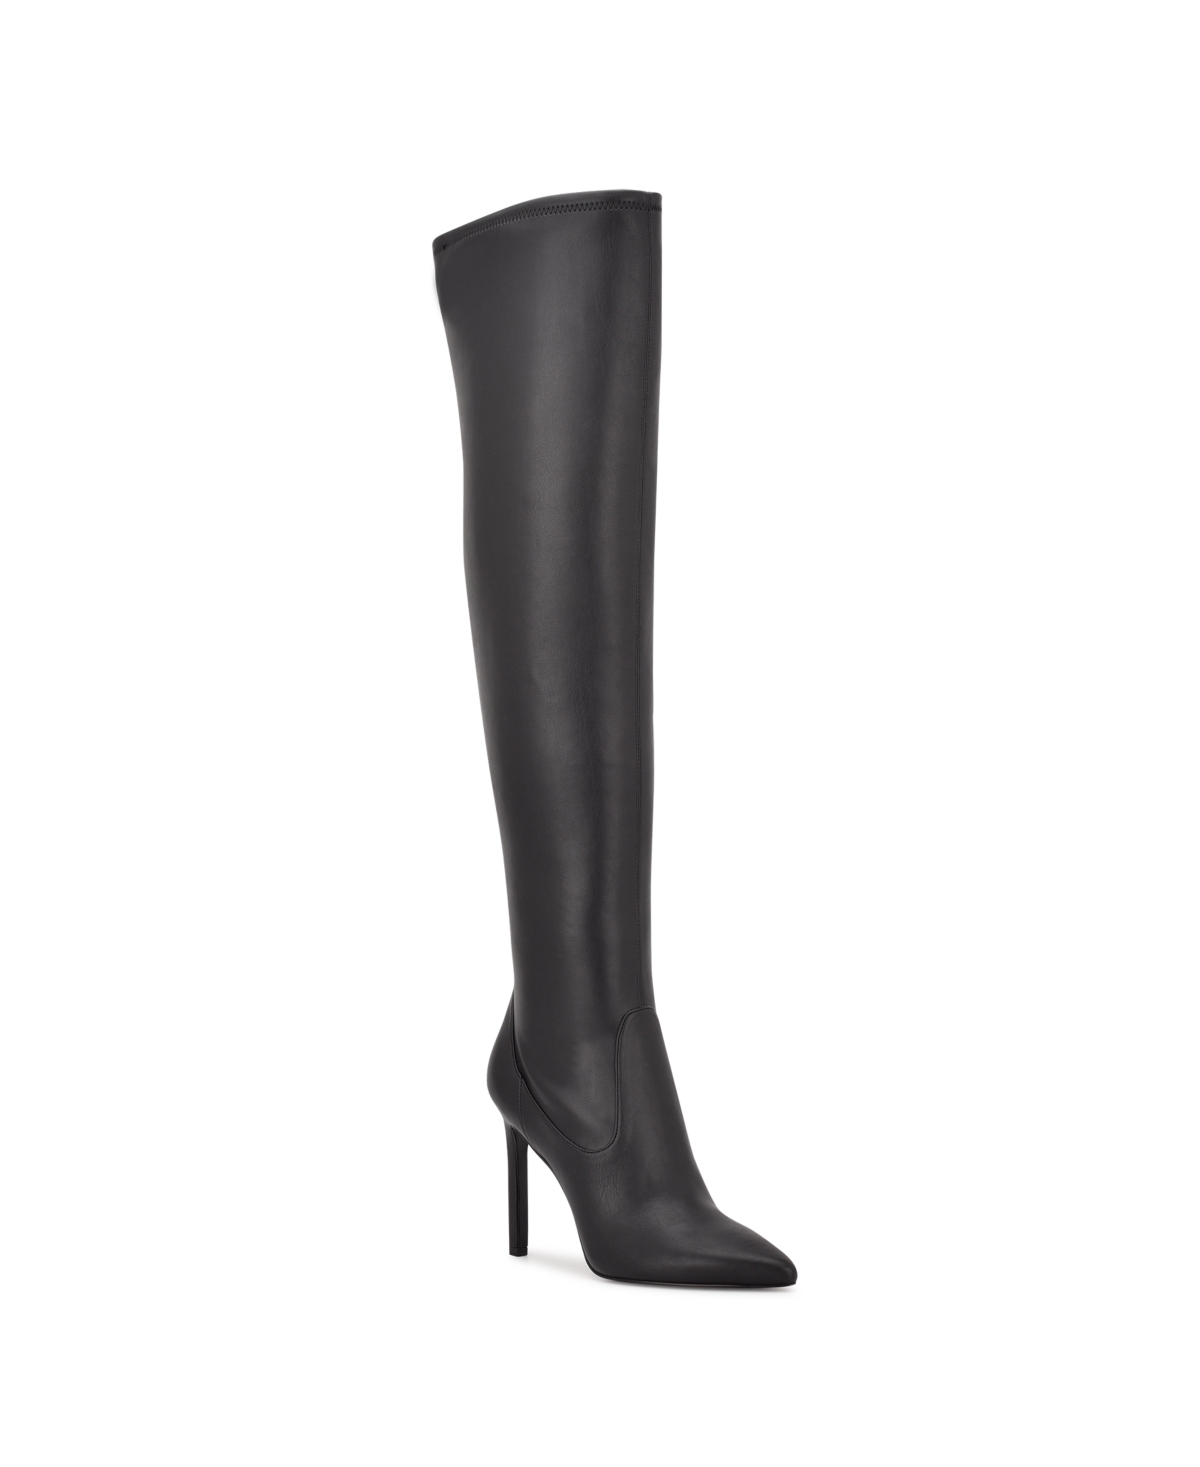 NINE WEST WOMEN'S TACY OVER THE KNEE BOOTS WOMEN'S SHOES